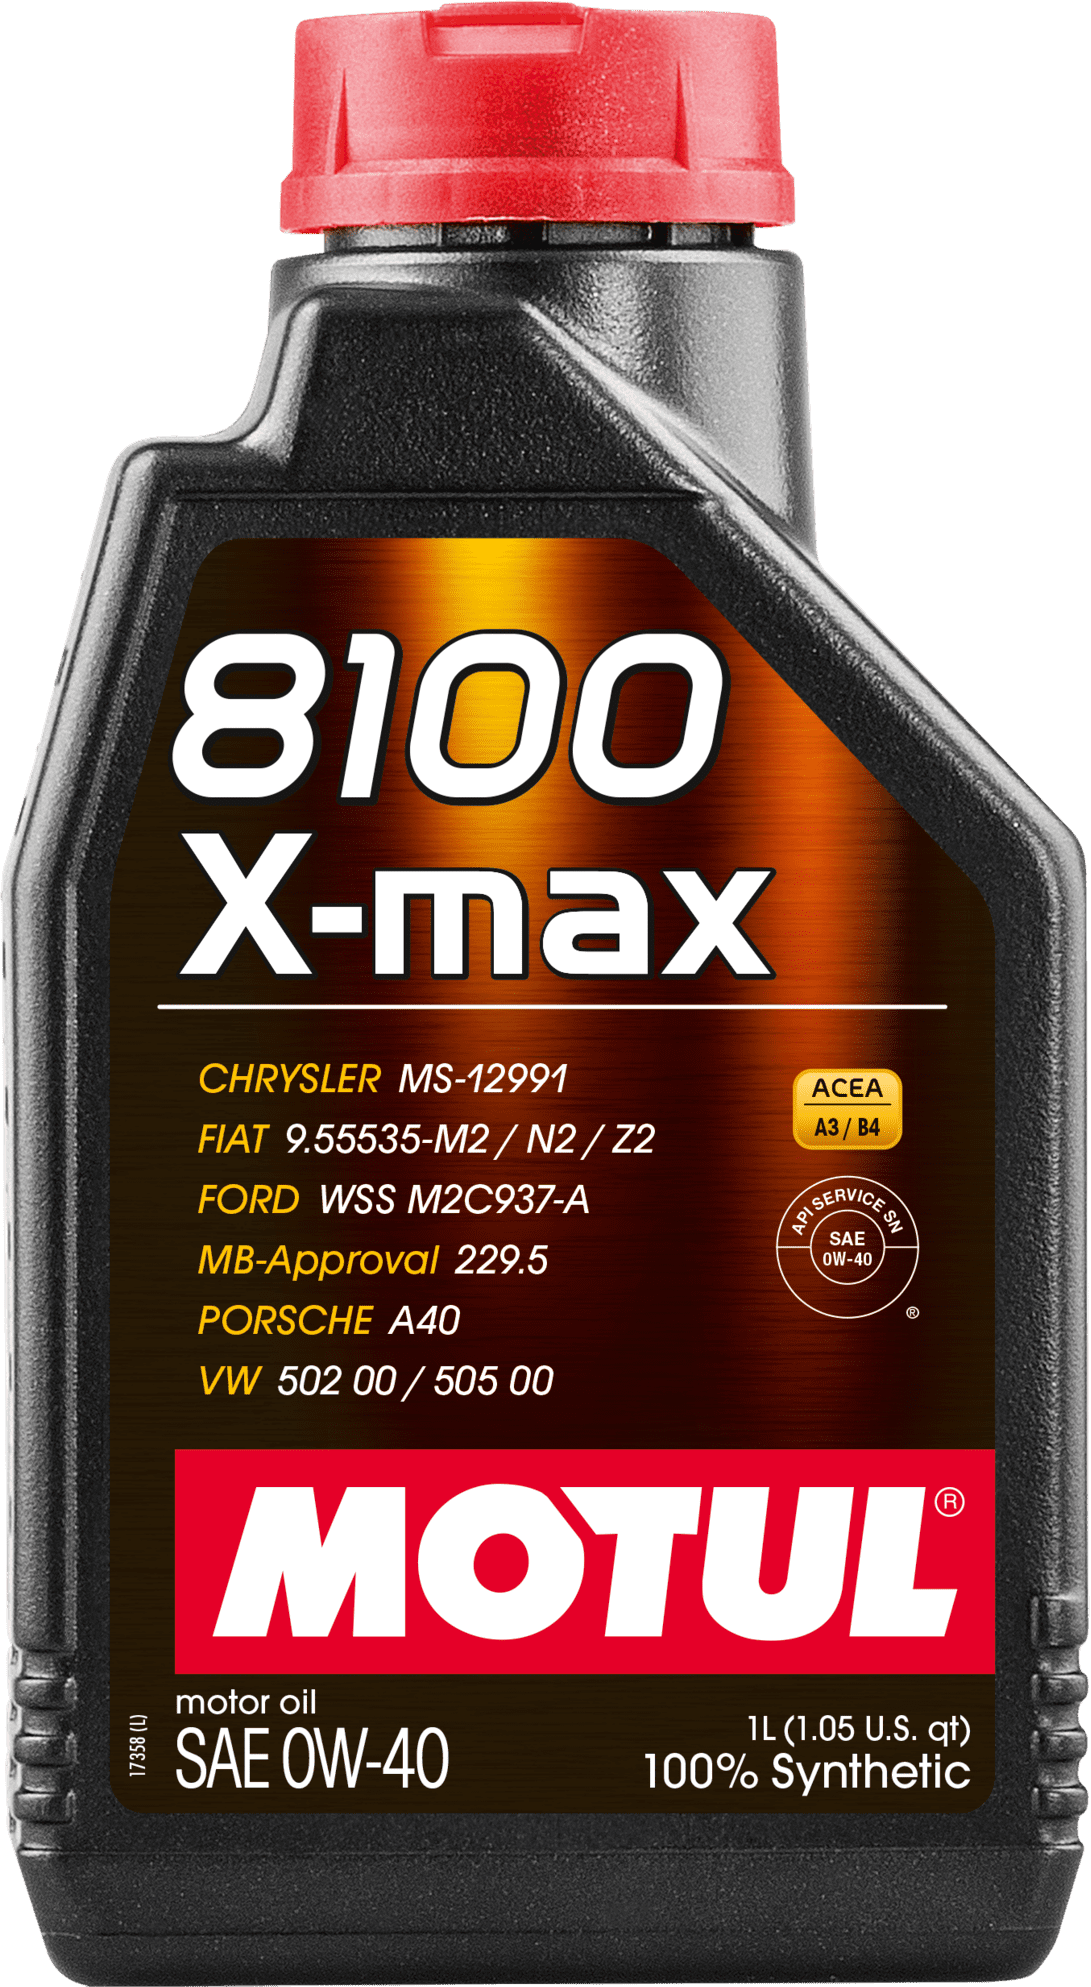 104531-1 100% Synthetic and high performance lubricant.